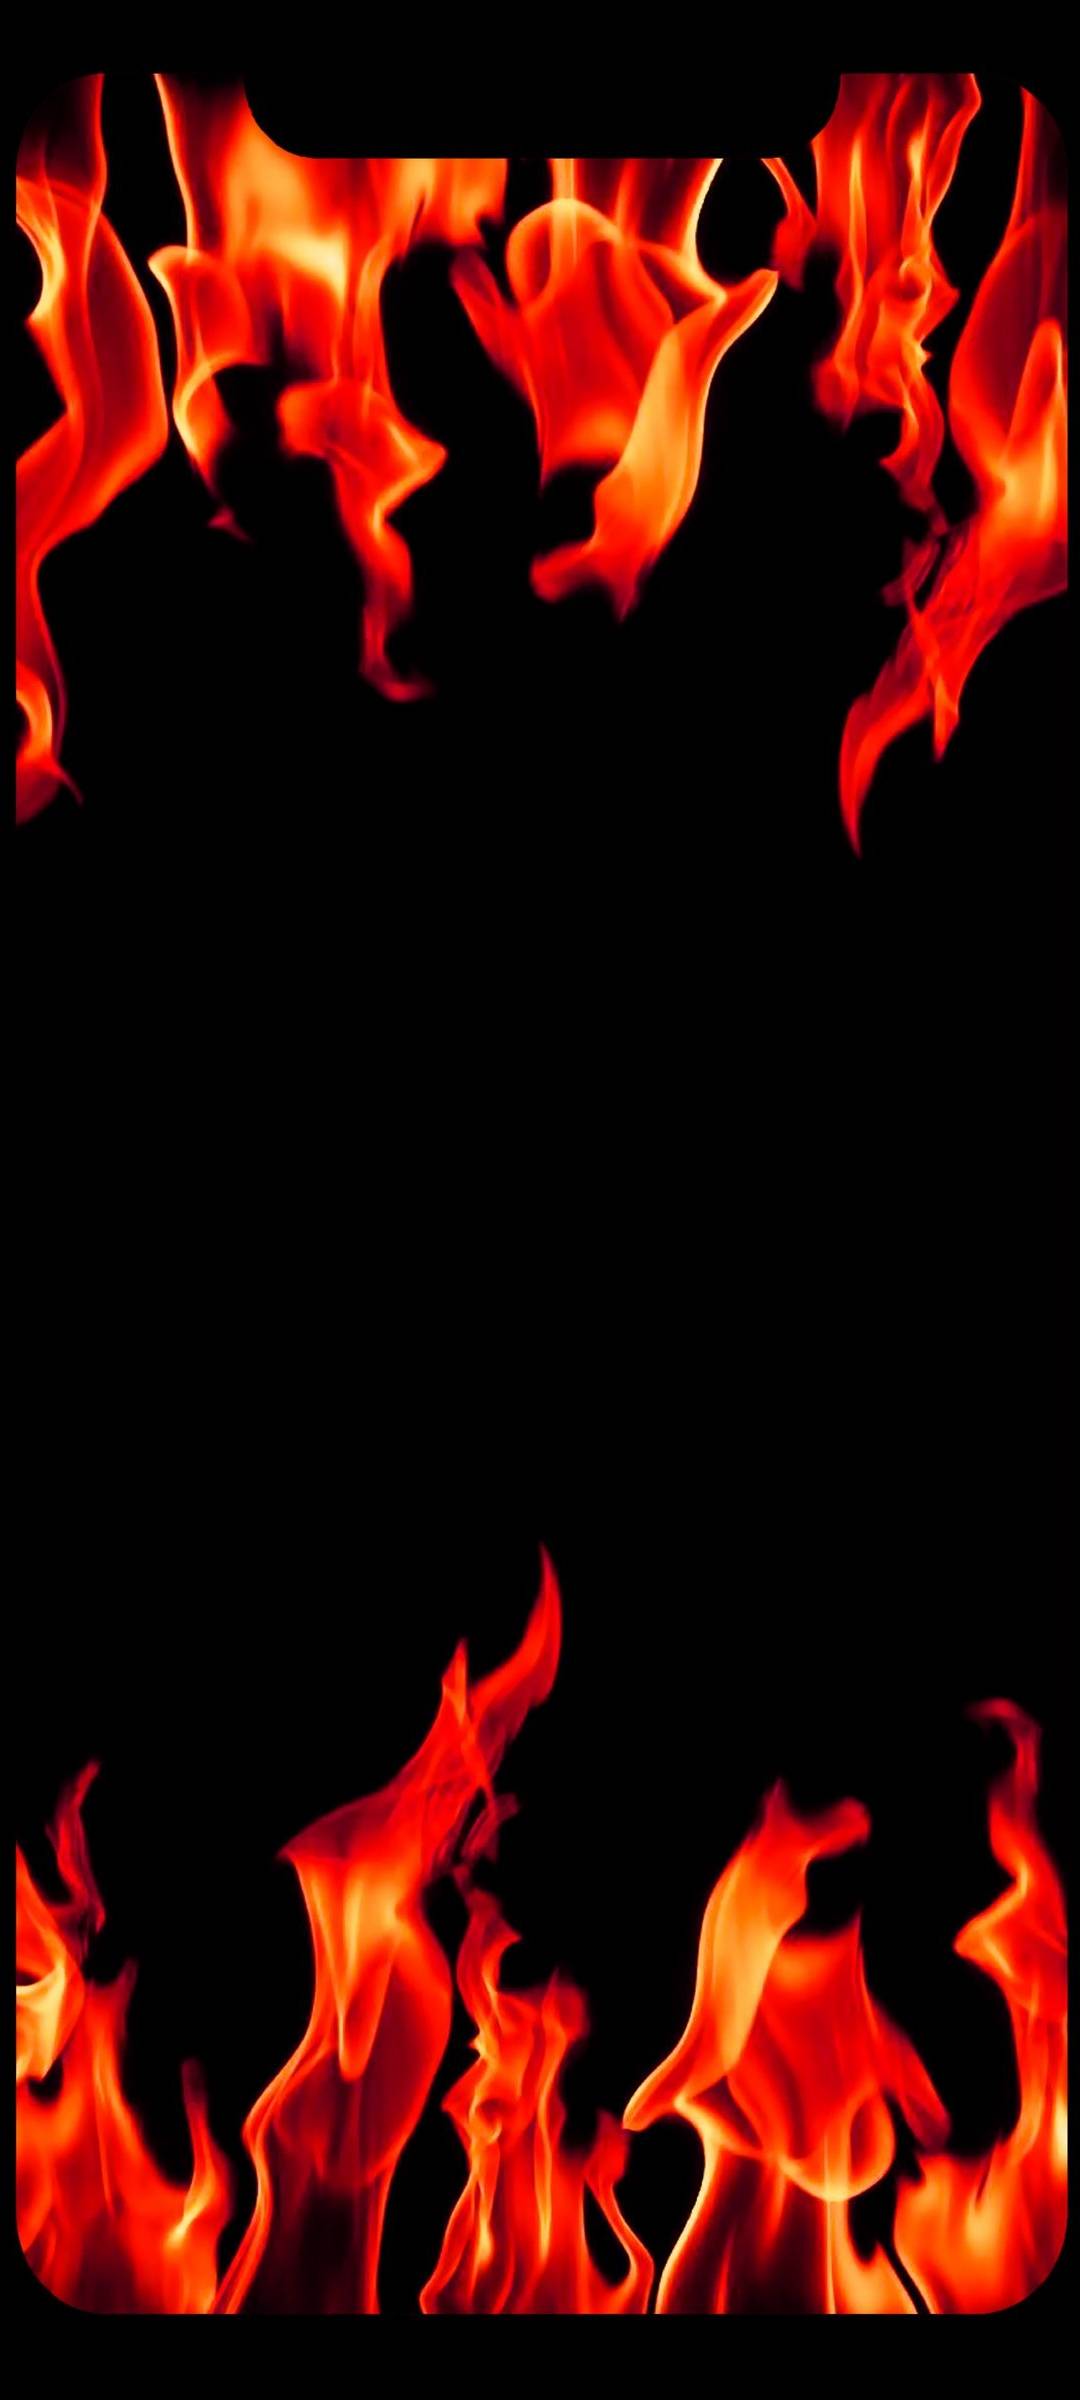 Fire Flames  IPhone Wallpapers  iPhone Wallpapers